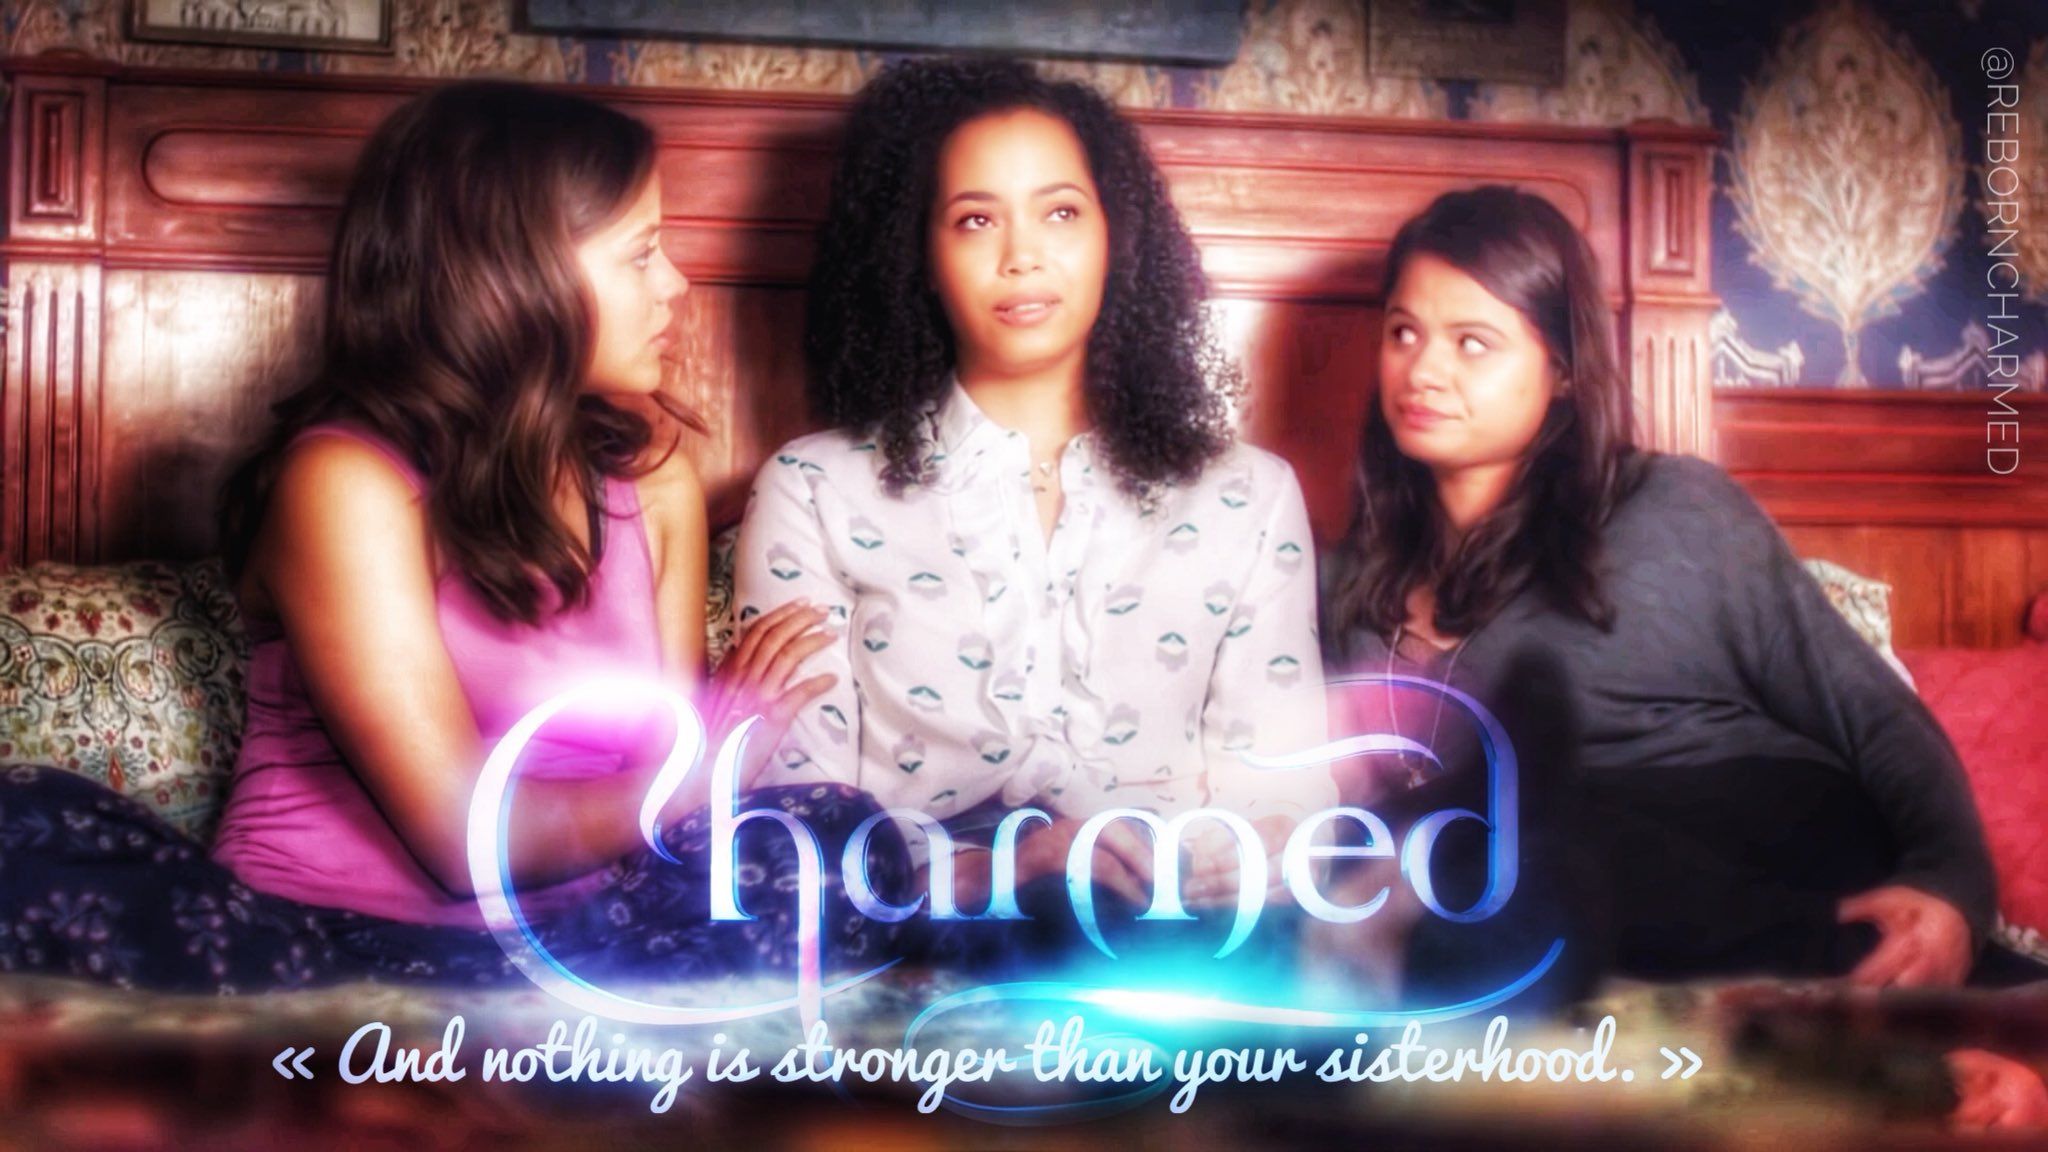 Reborn Charmed yourself to be Charmed again. #charmed #reboot